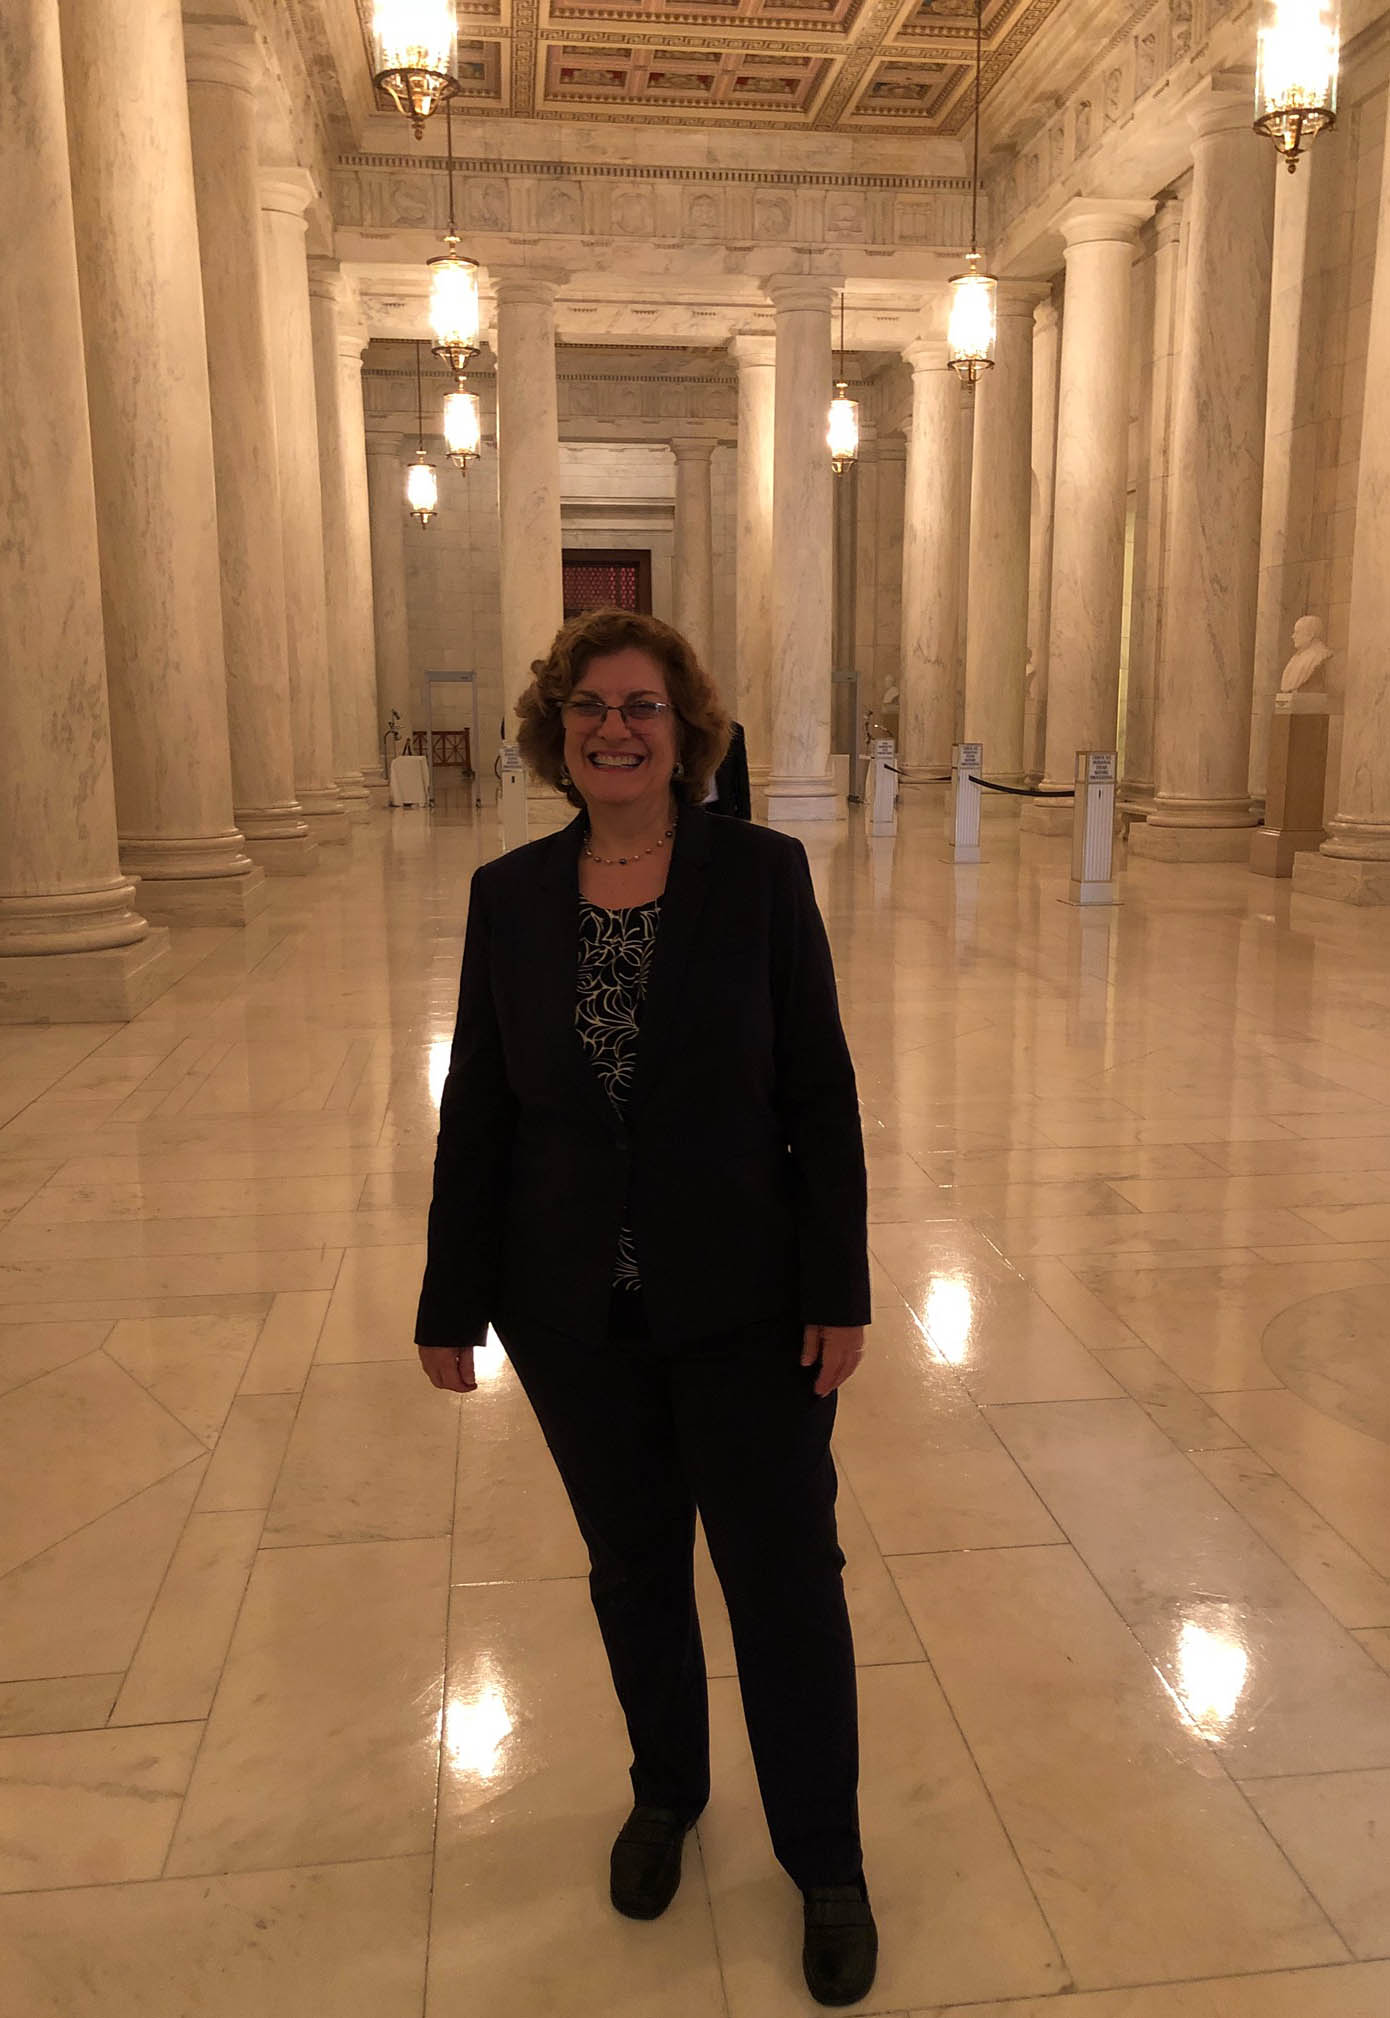 LBJ Senior Lecturer Michele Deitch in the Great Hall at the U.S. Supreme Court on the day she was admitted to the Supreme Court Bar. (Photo courtesy of Michele Deitch)